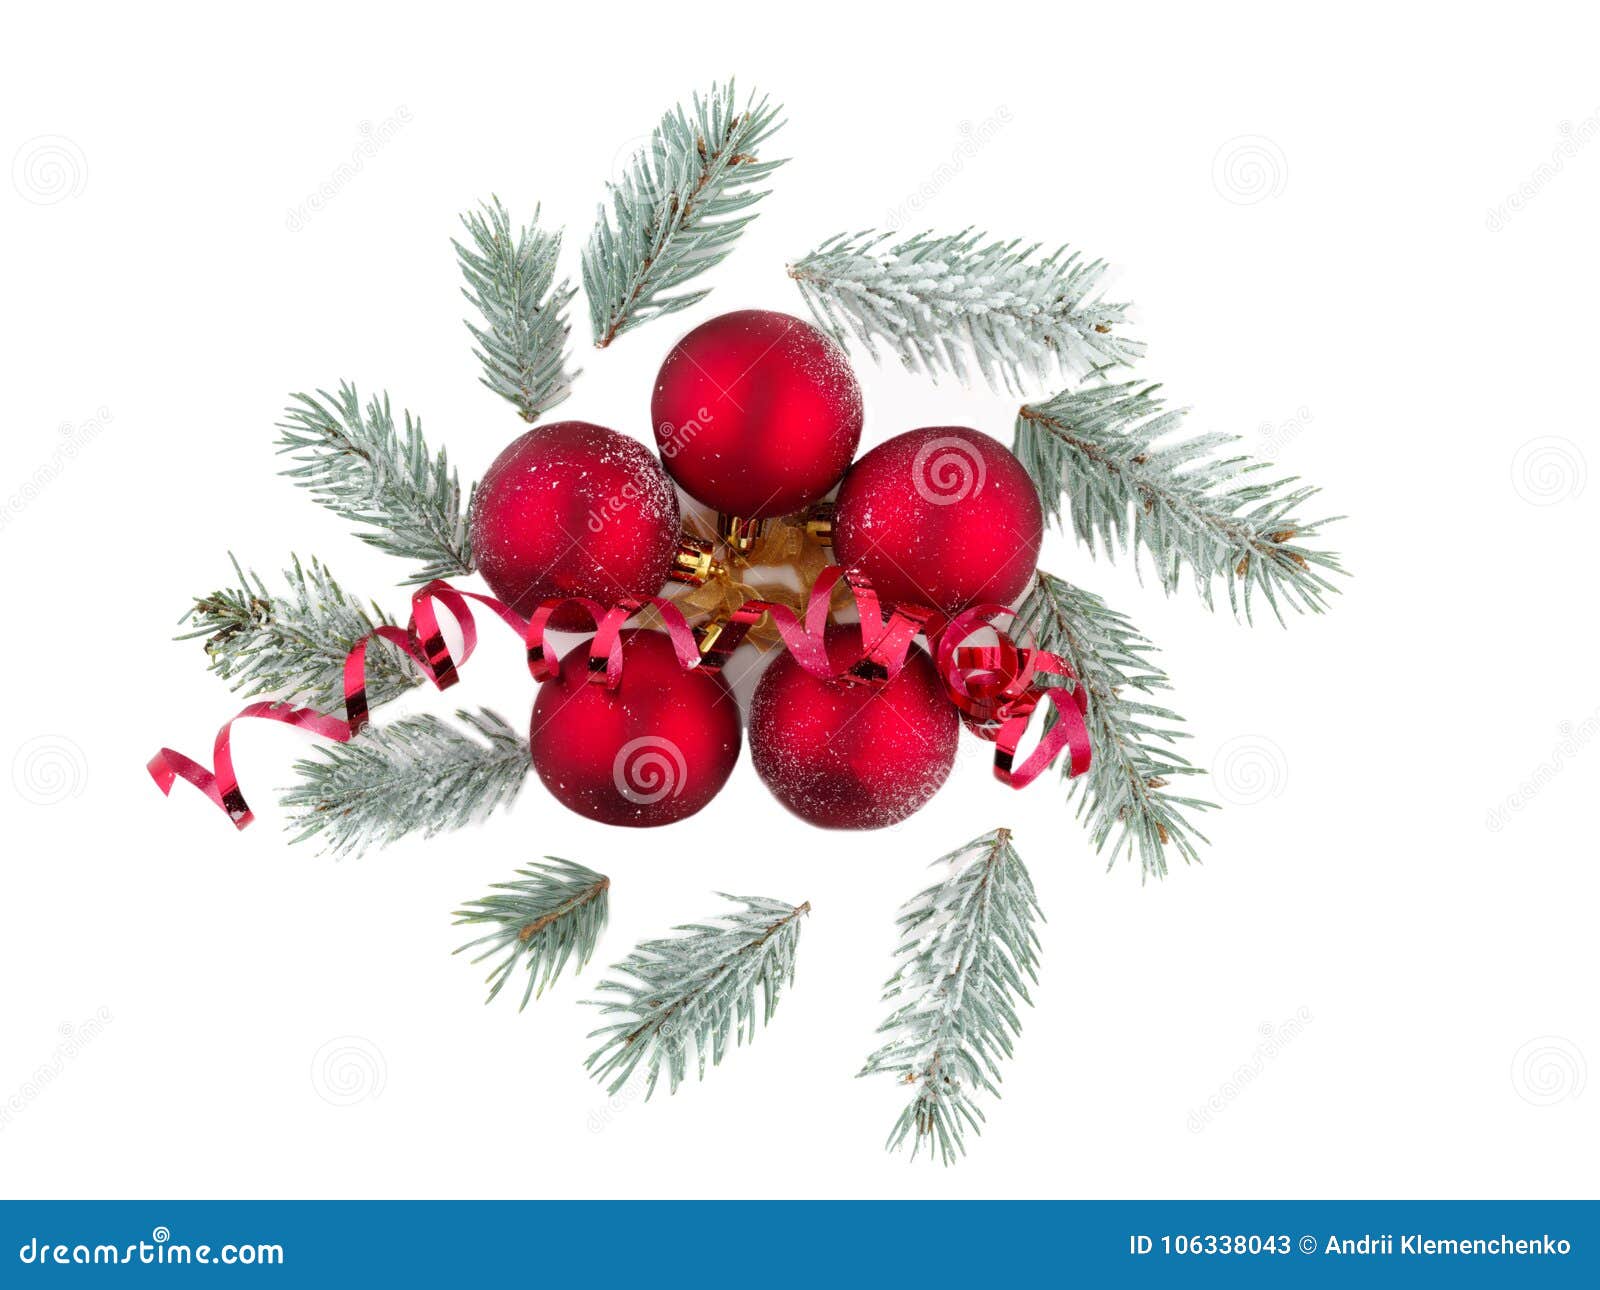 Several beautiful festive Christmas balls and small twigs of a Christmas tree Isolated on white background